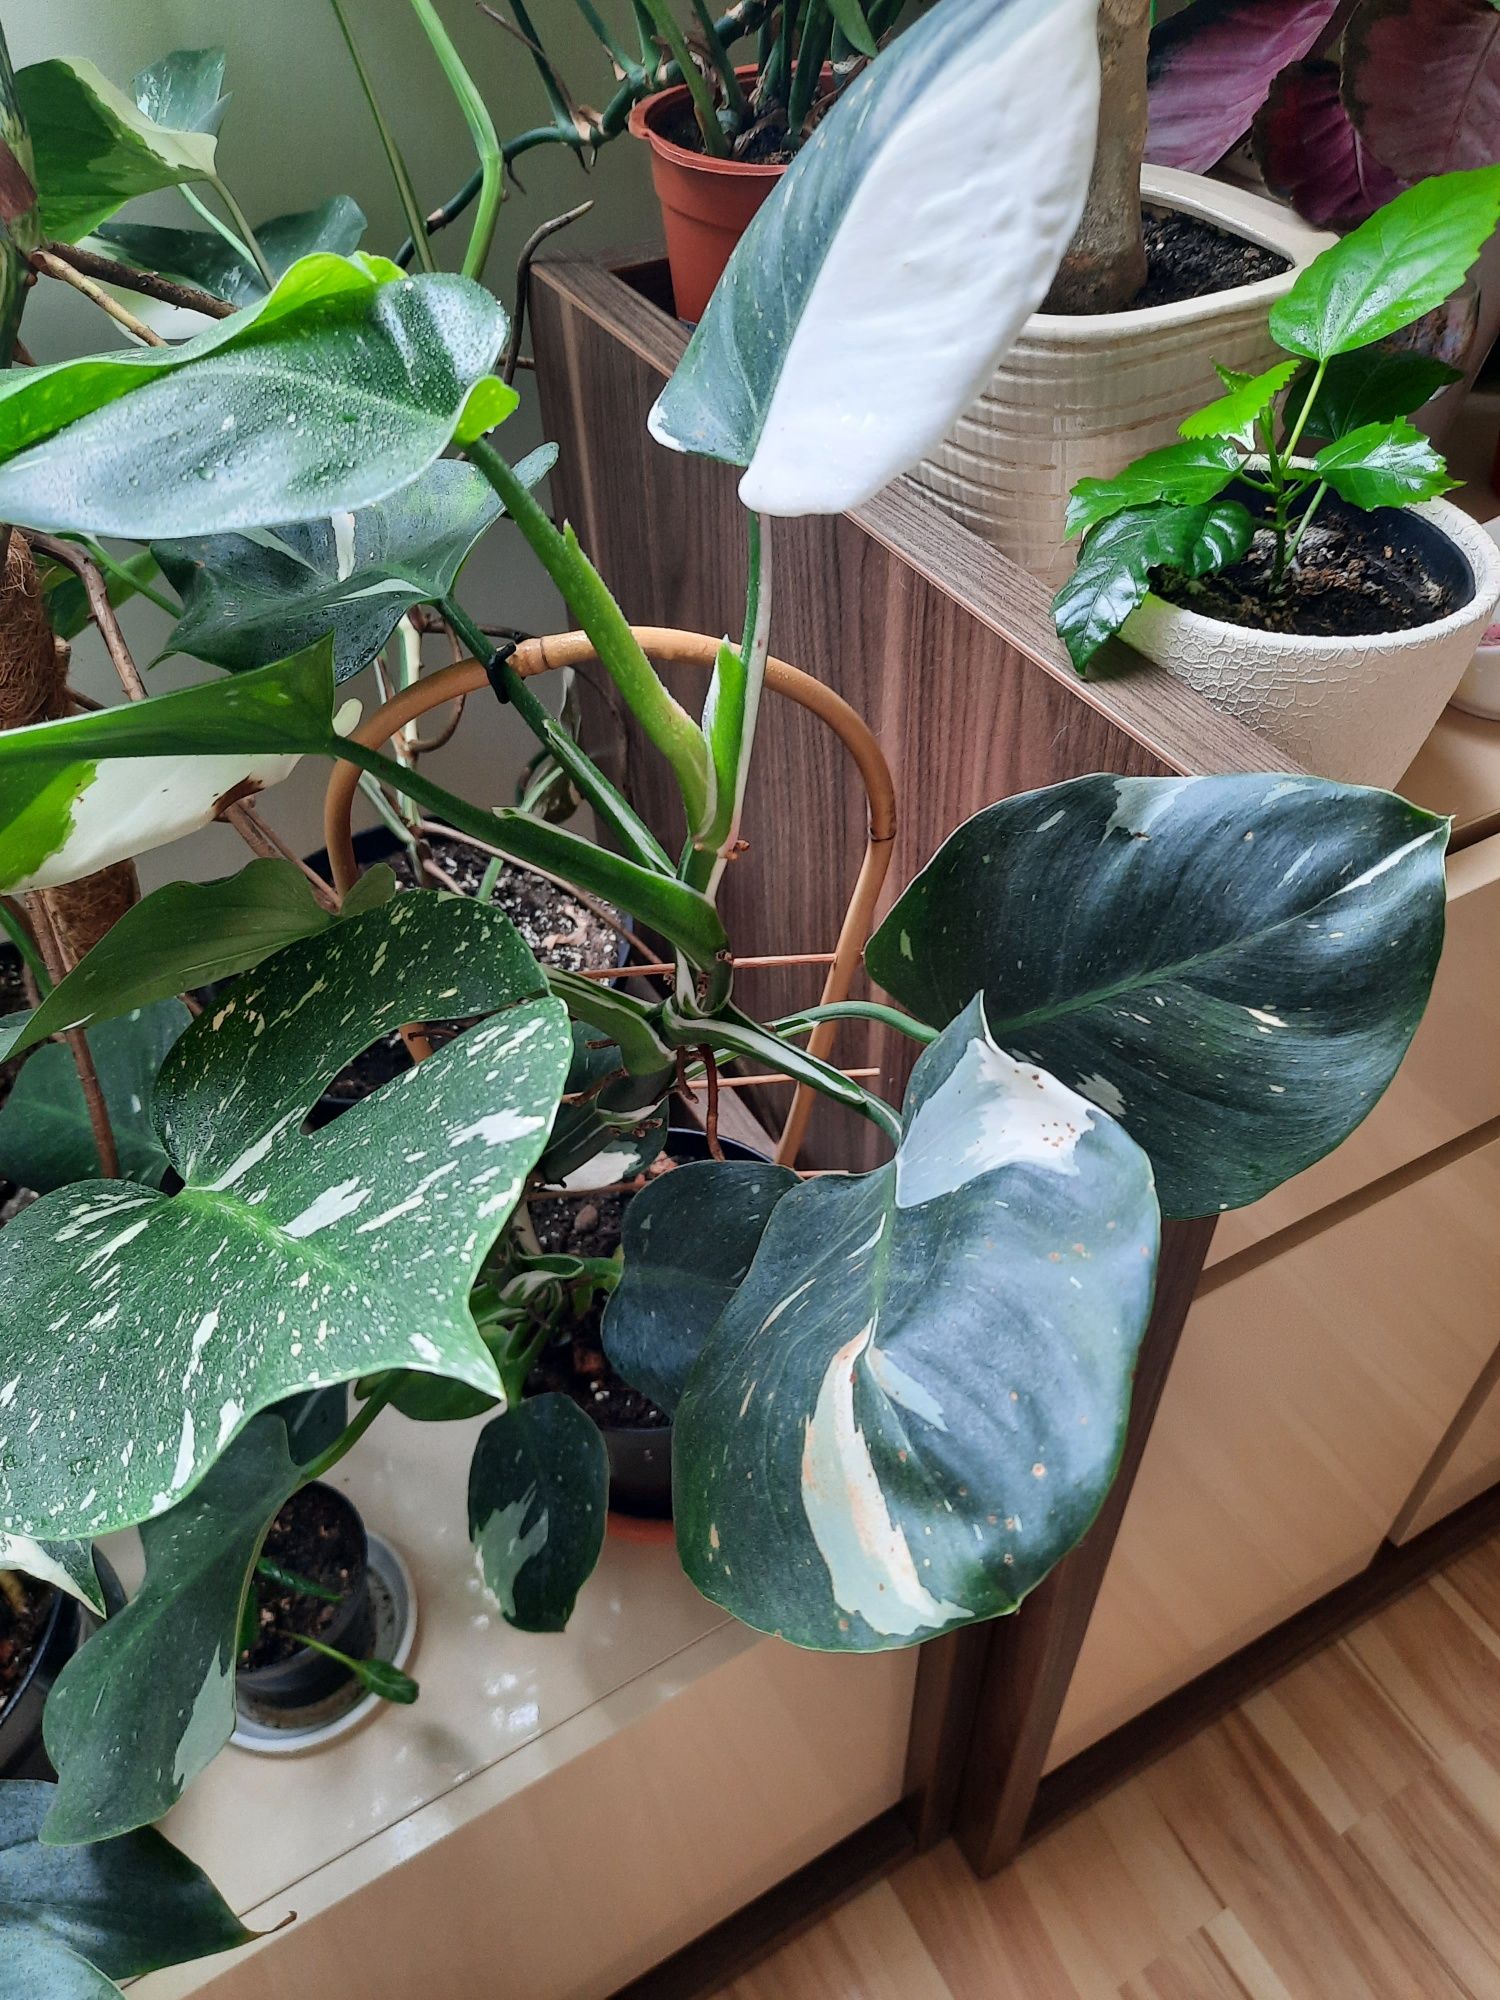 White wizard philodendron